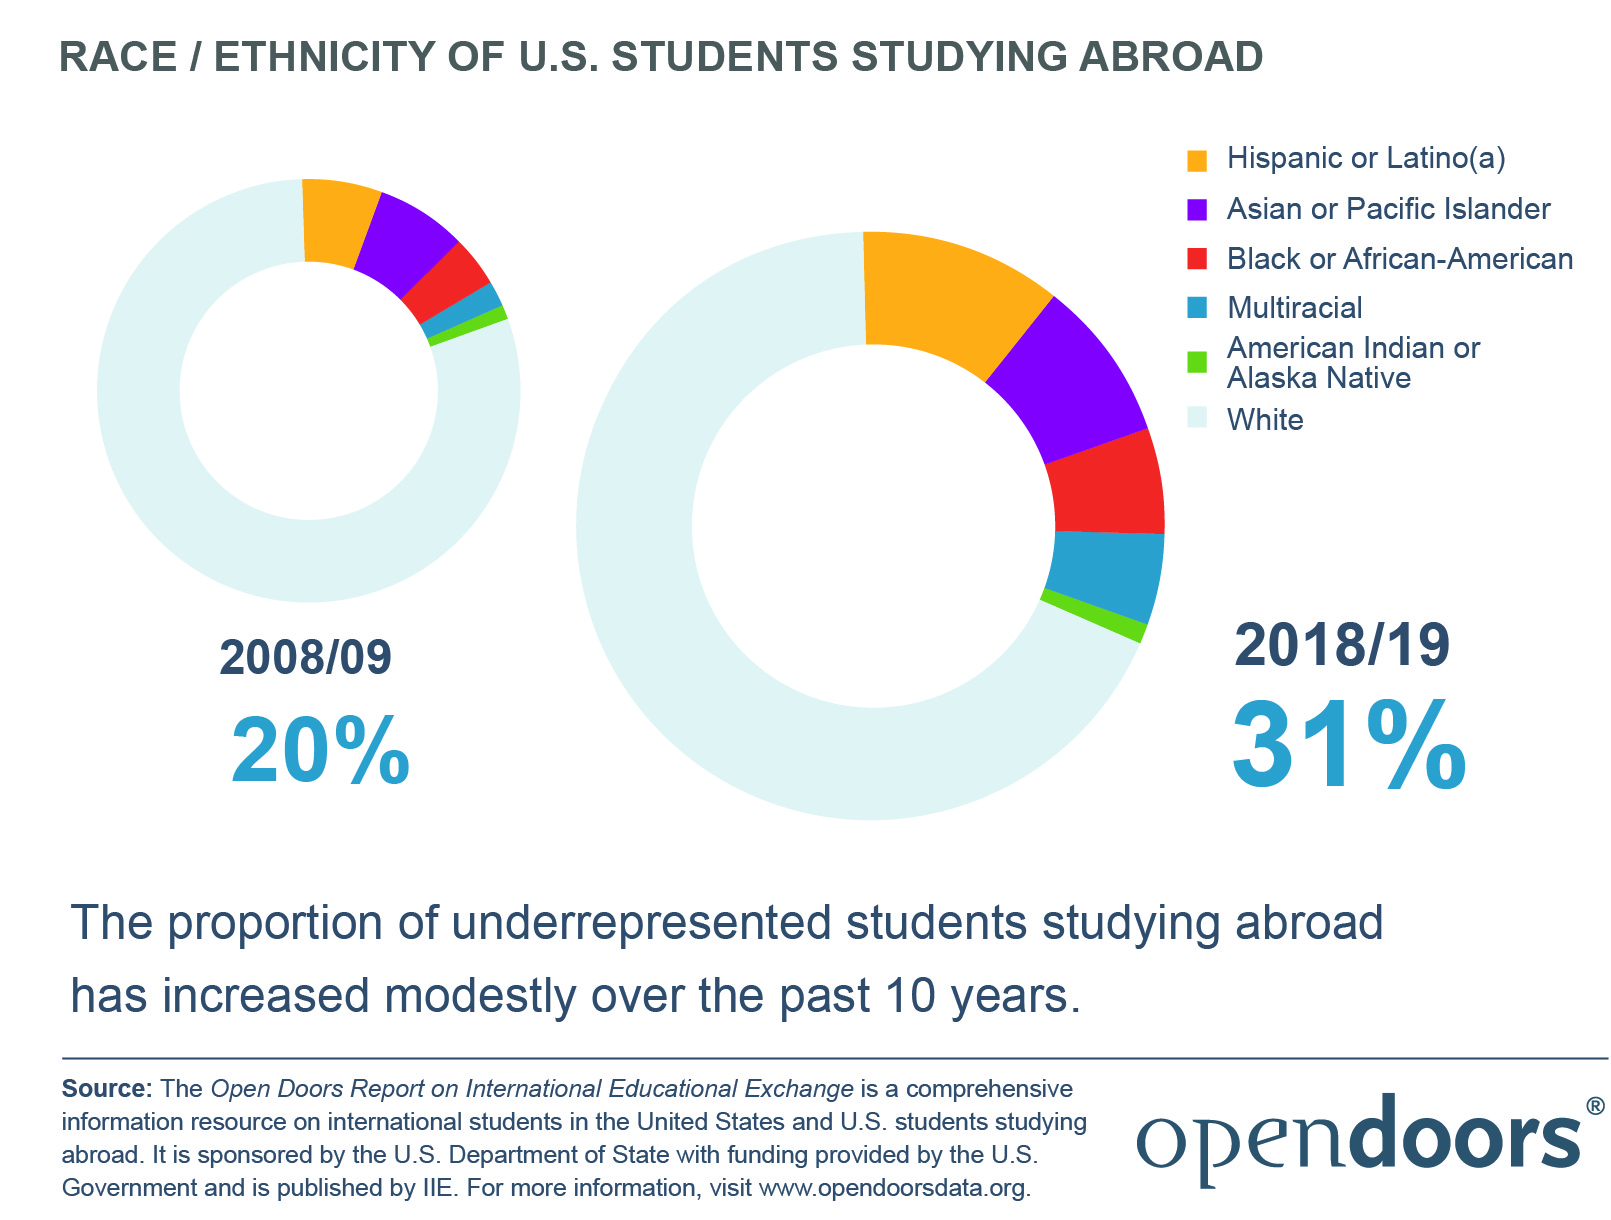 STAB-2020-Race-Ethnicity-Of-U.S.-Students-Studying-Abroad.jpg